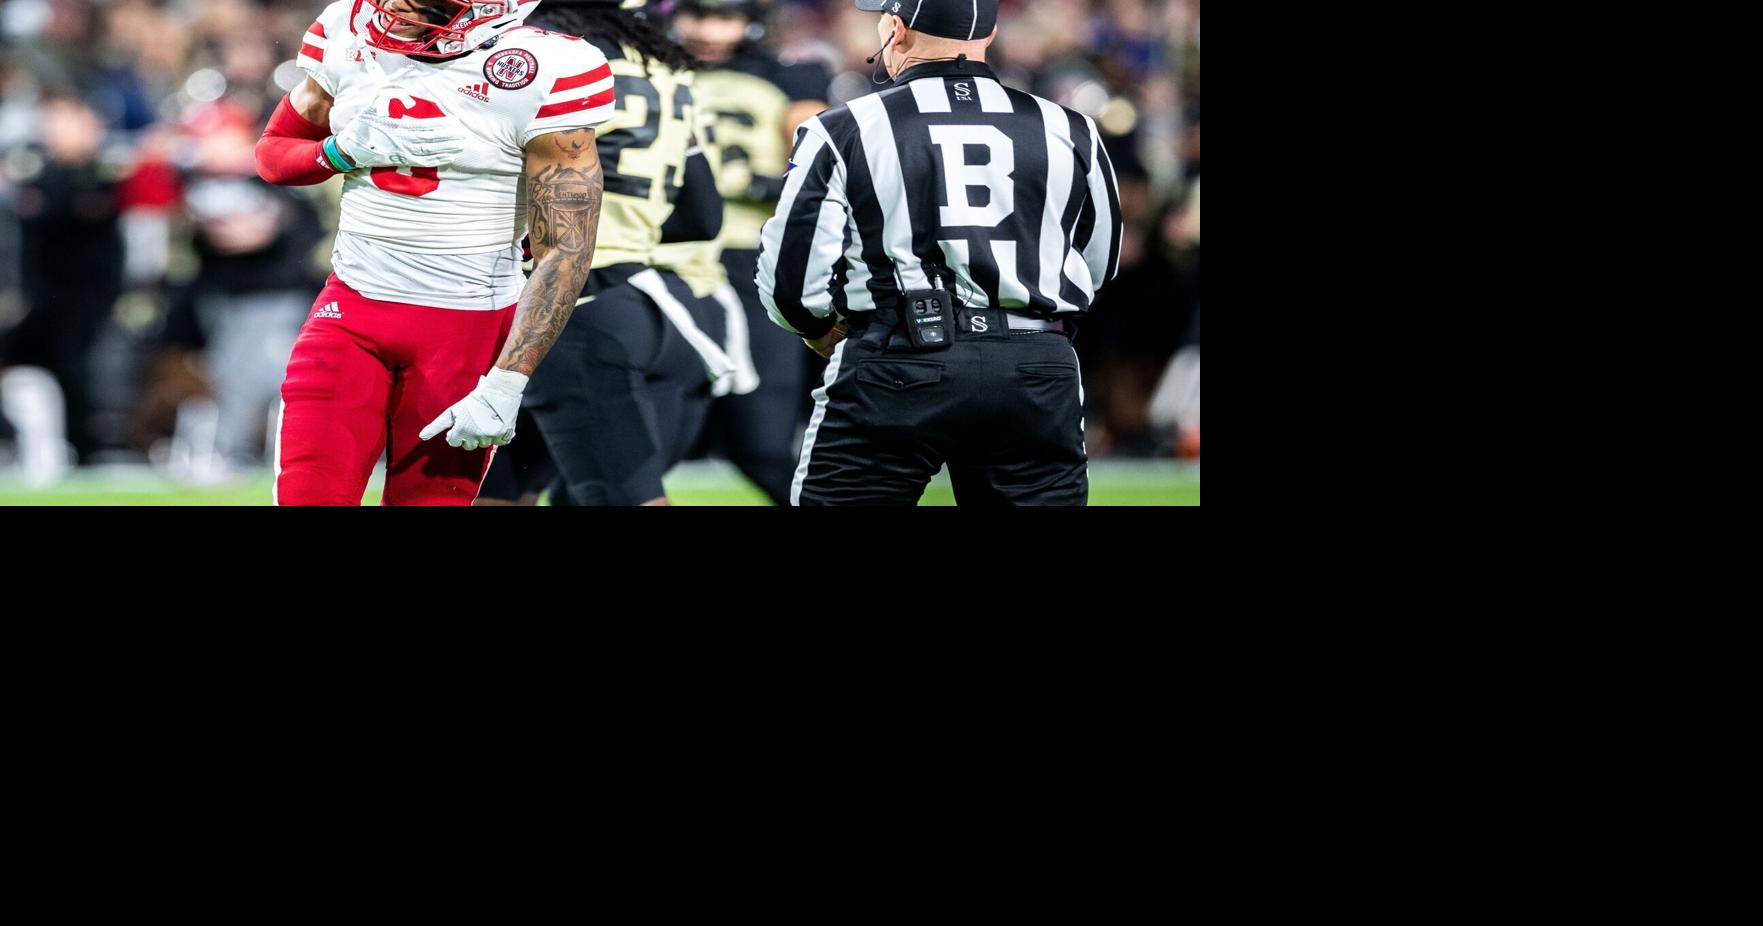 HuskerExtra's best stories from the last week, the Nebraska-Purdue matchup